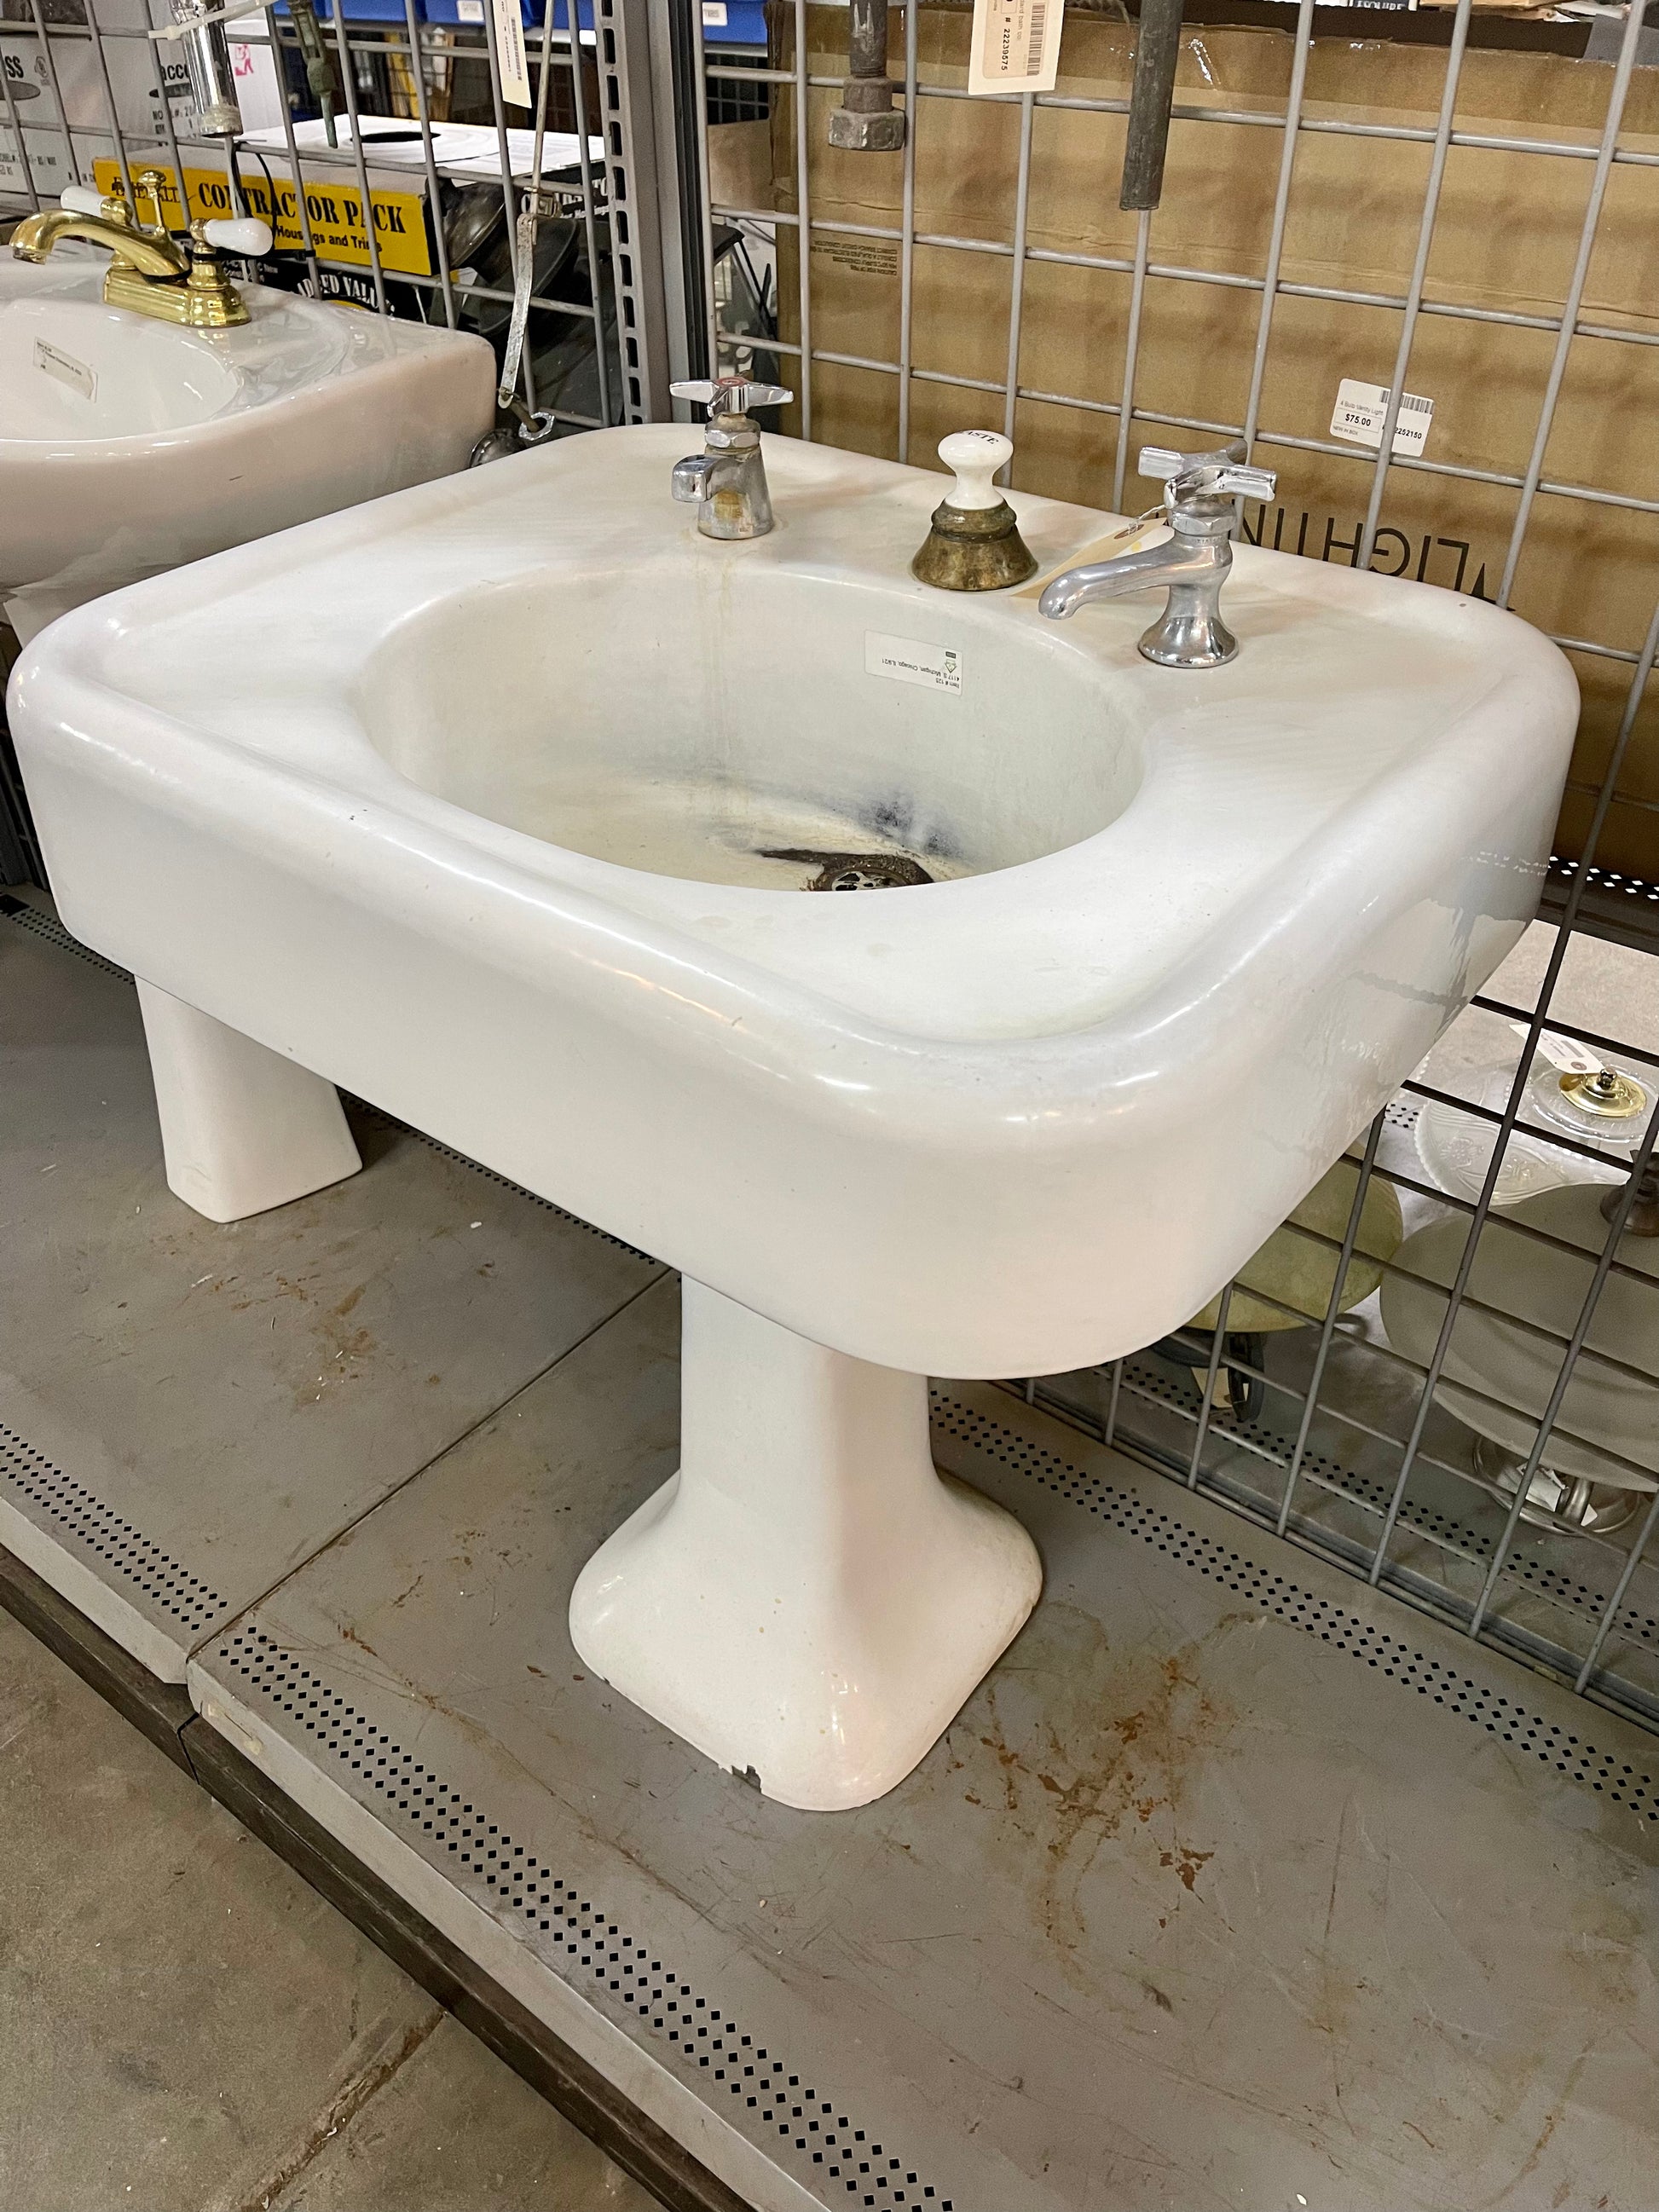 Pedestal Sinks: What to Know Before You Buy